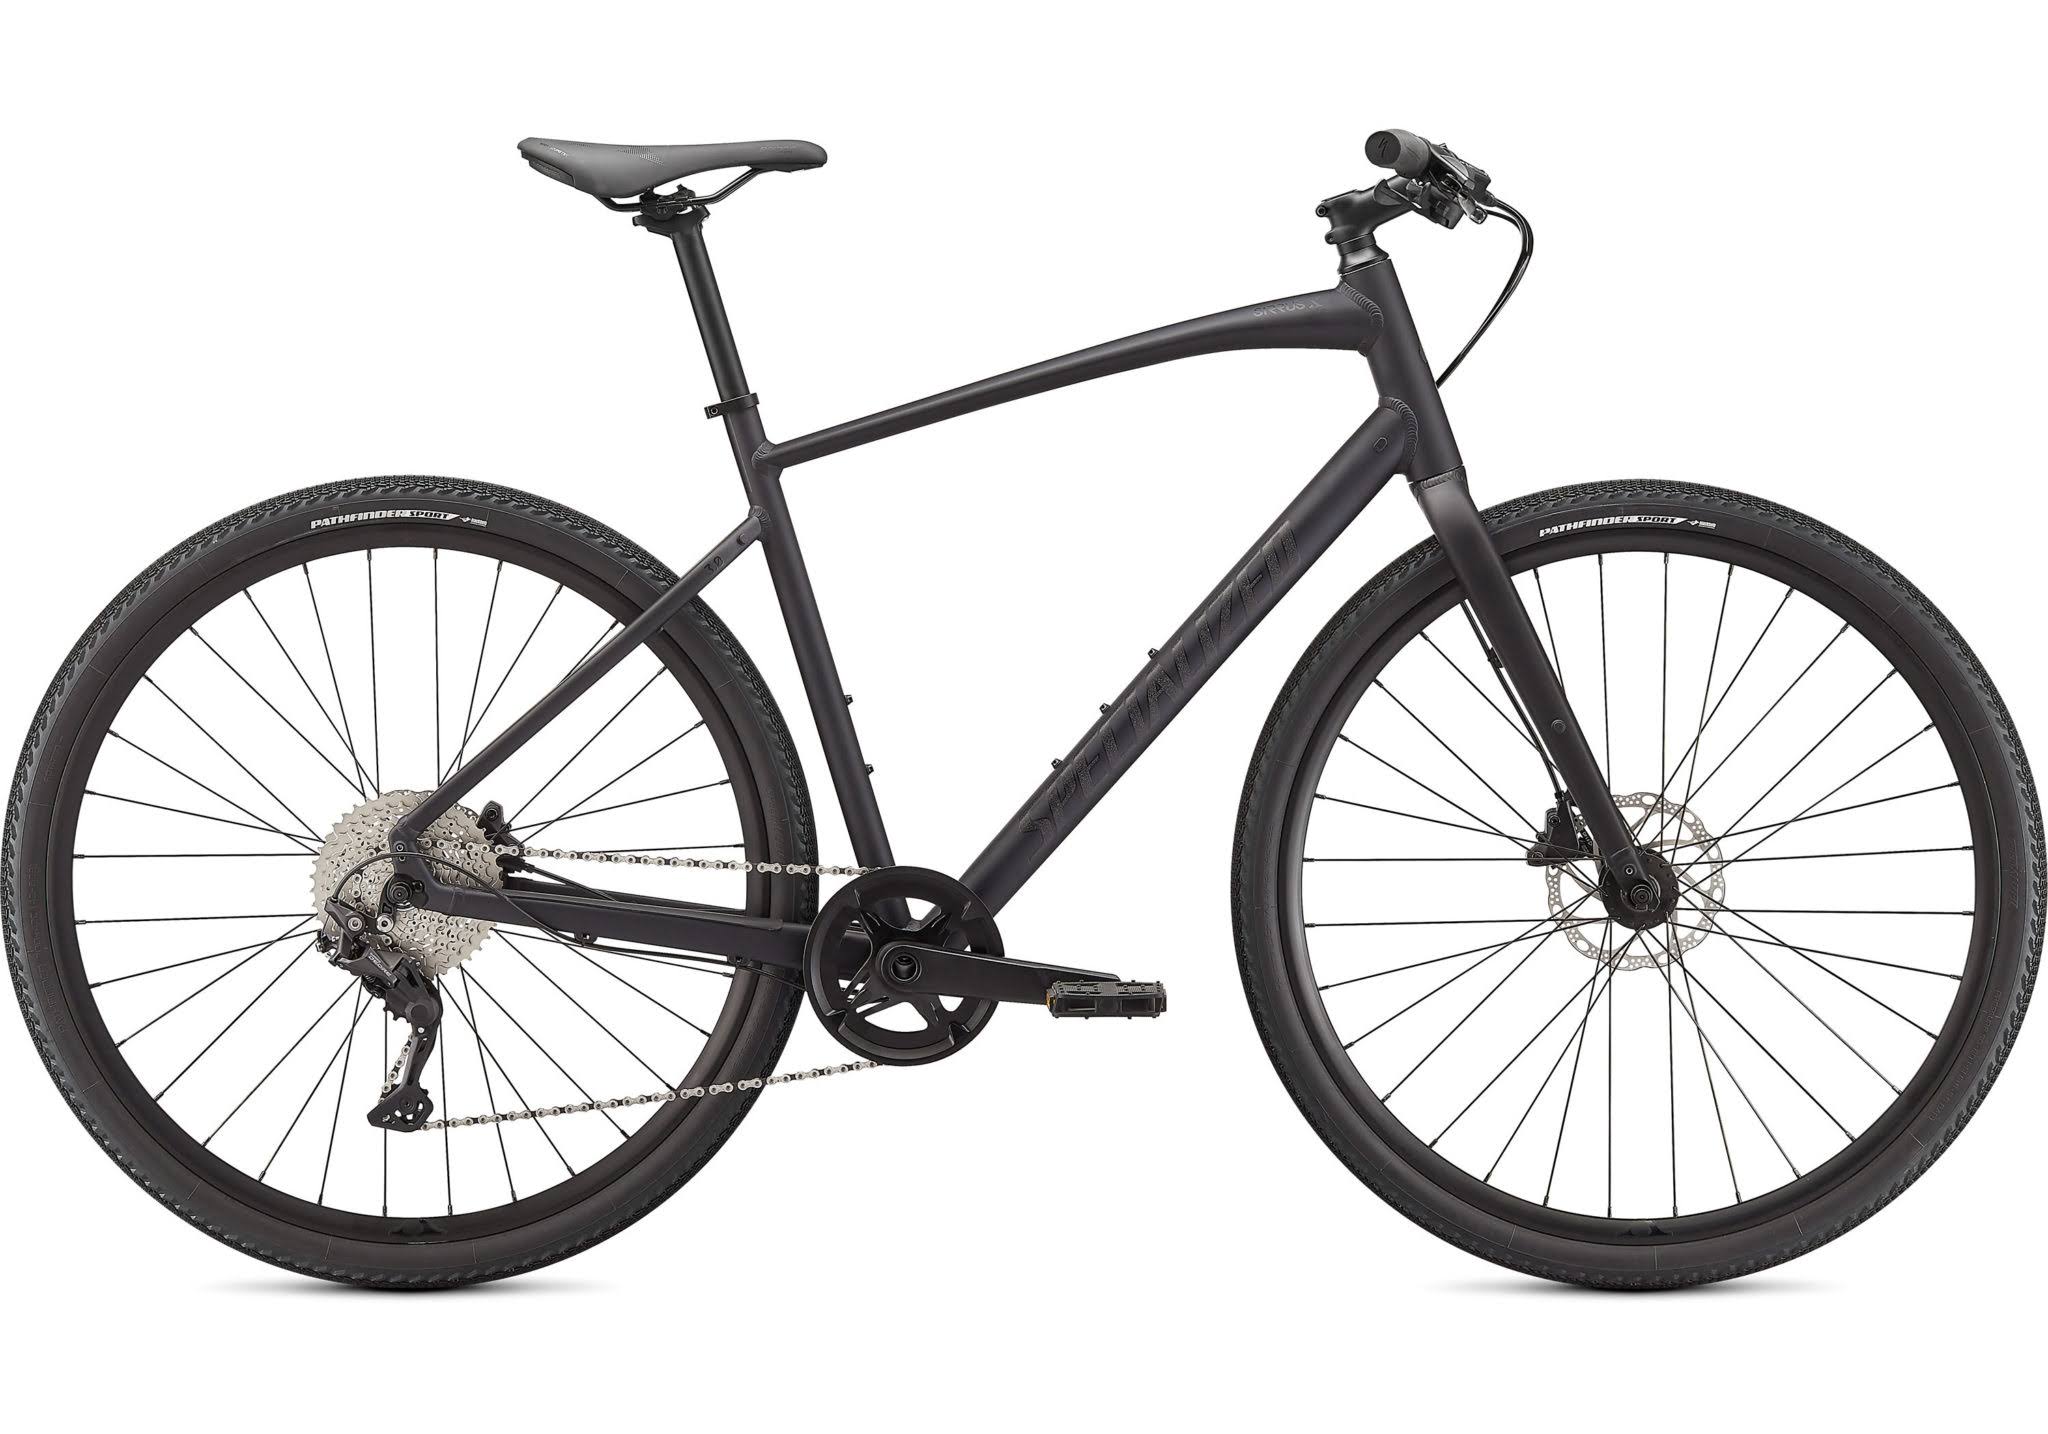 2021 Specialized Sirrus x 3.0 (Colour: Black, Size: Small)